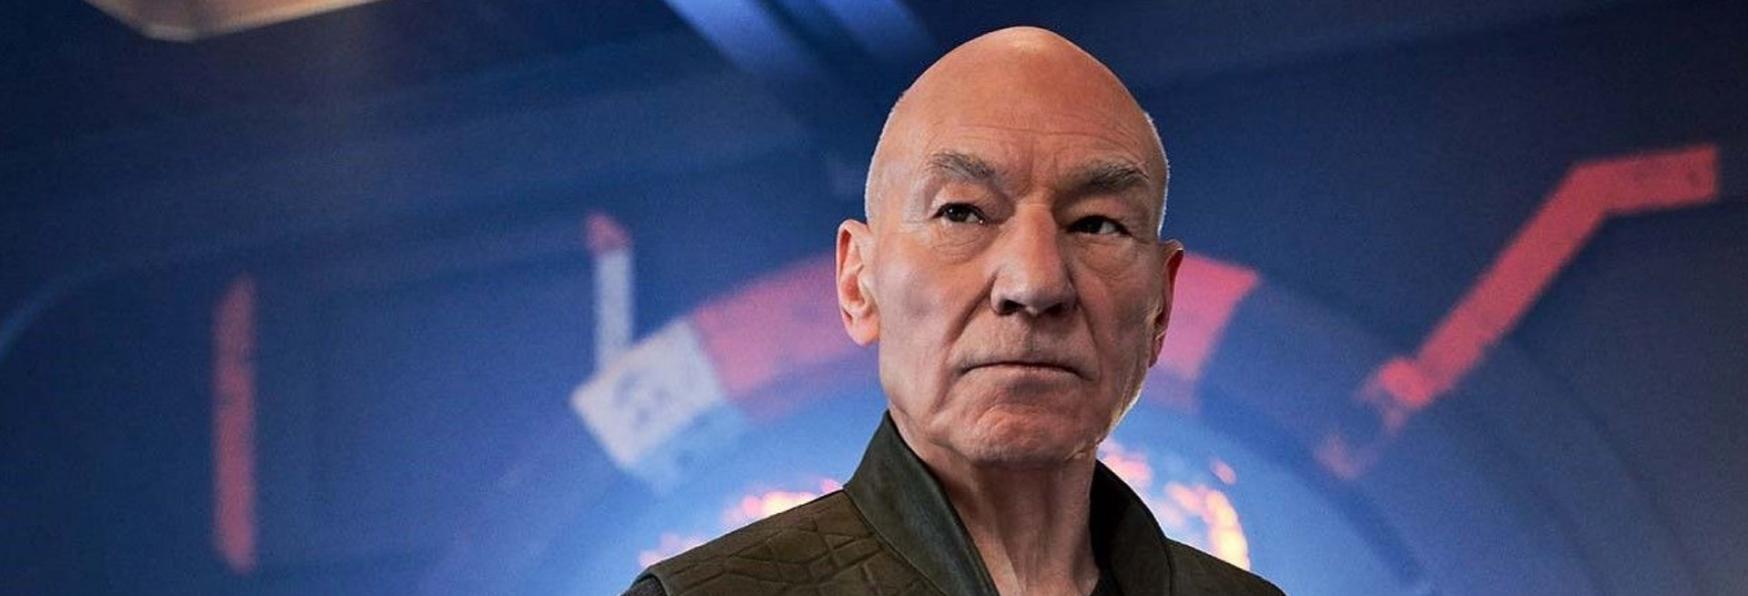 Star Trek: Picard 3 - The new Teaser reveals when we will see the Full Trailer of the Final Season